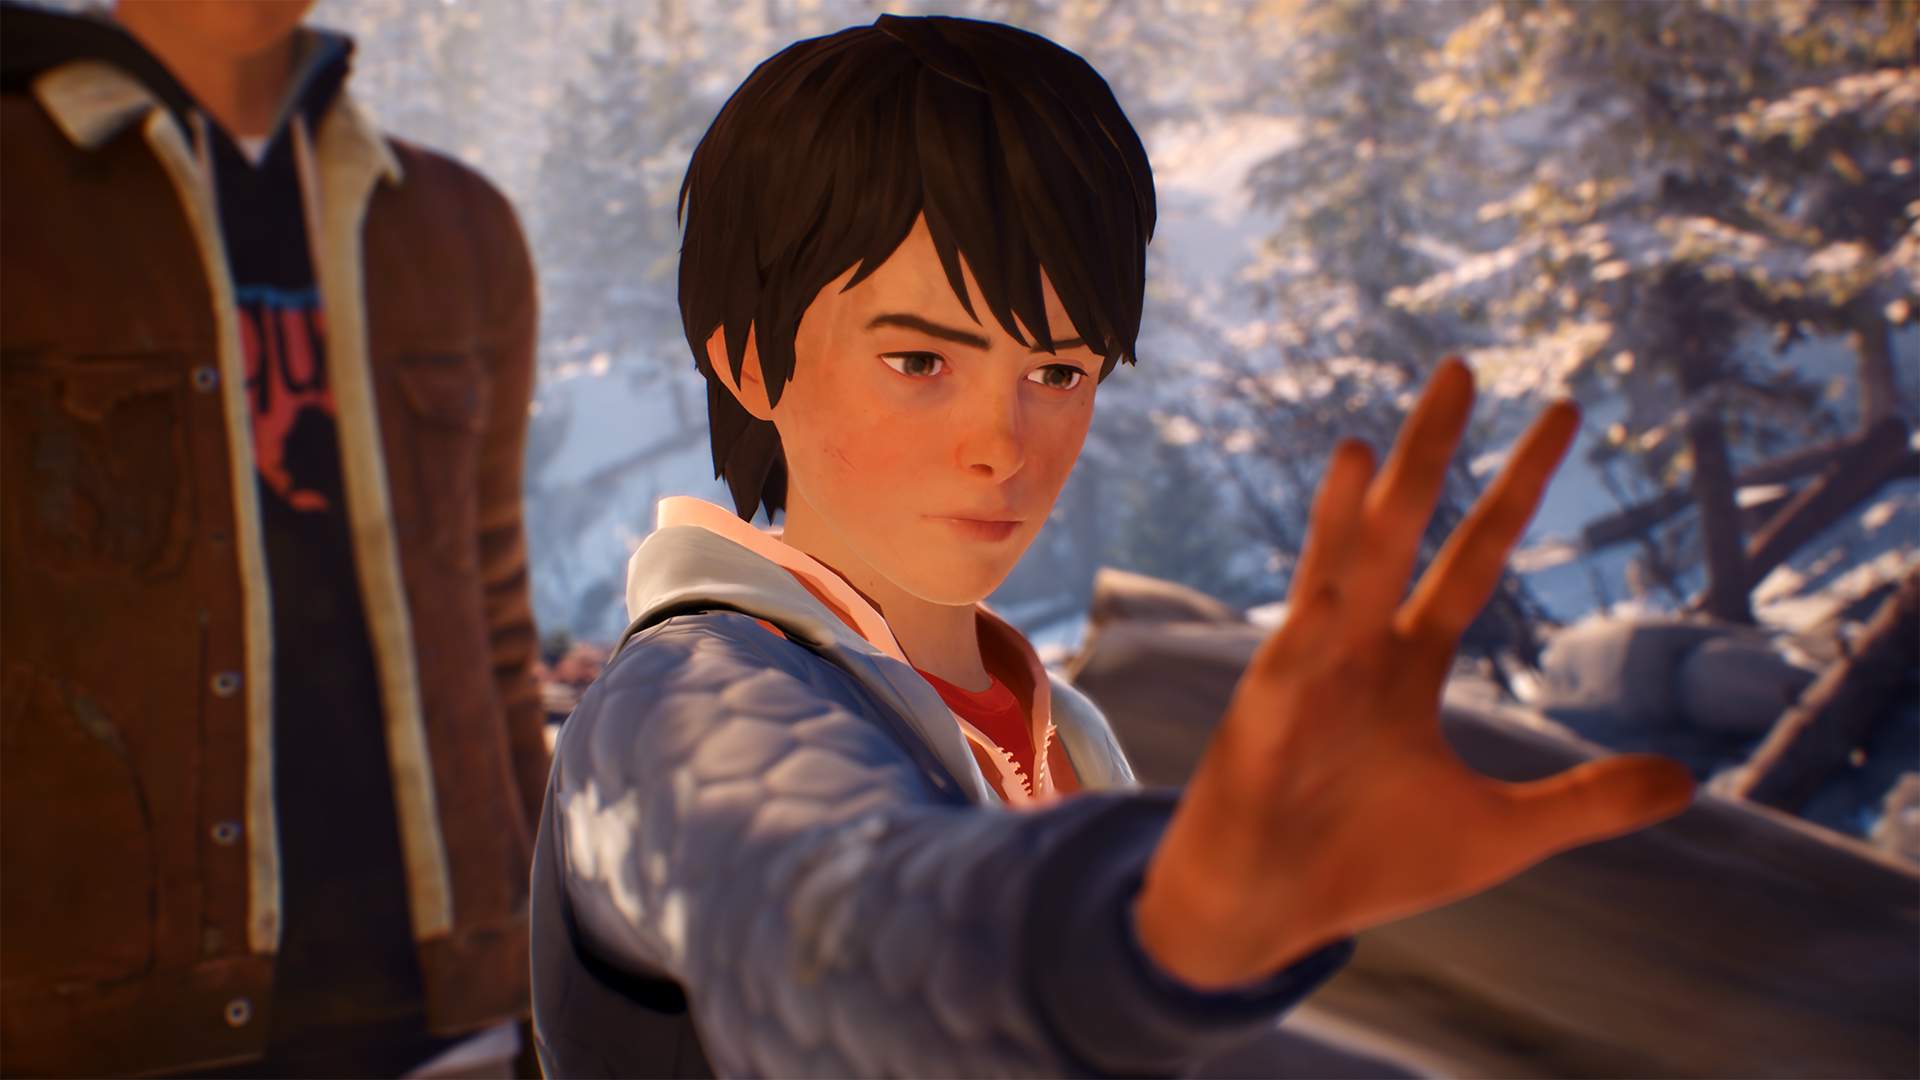 Life is Strange Dev's New Game is Something Completely Different